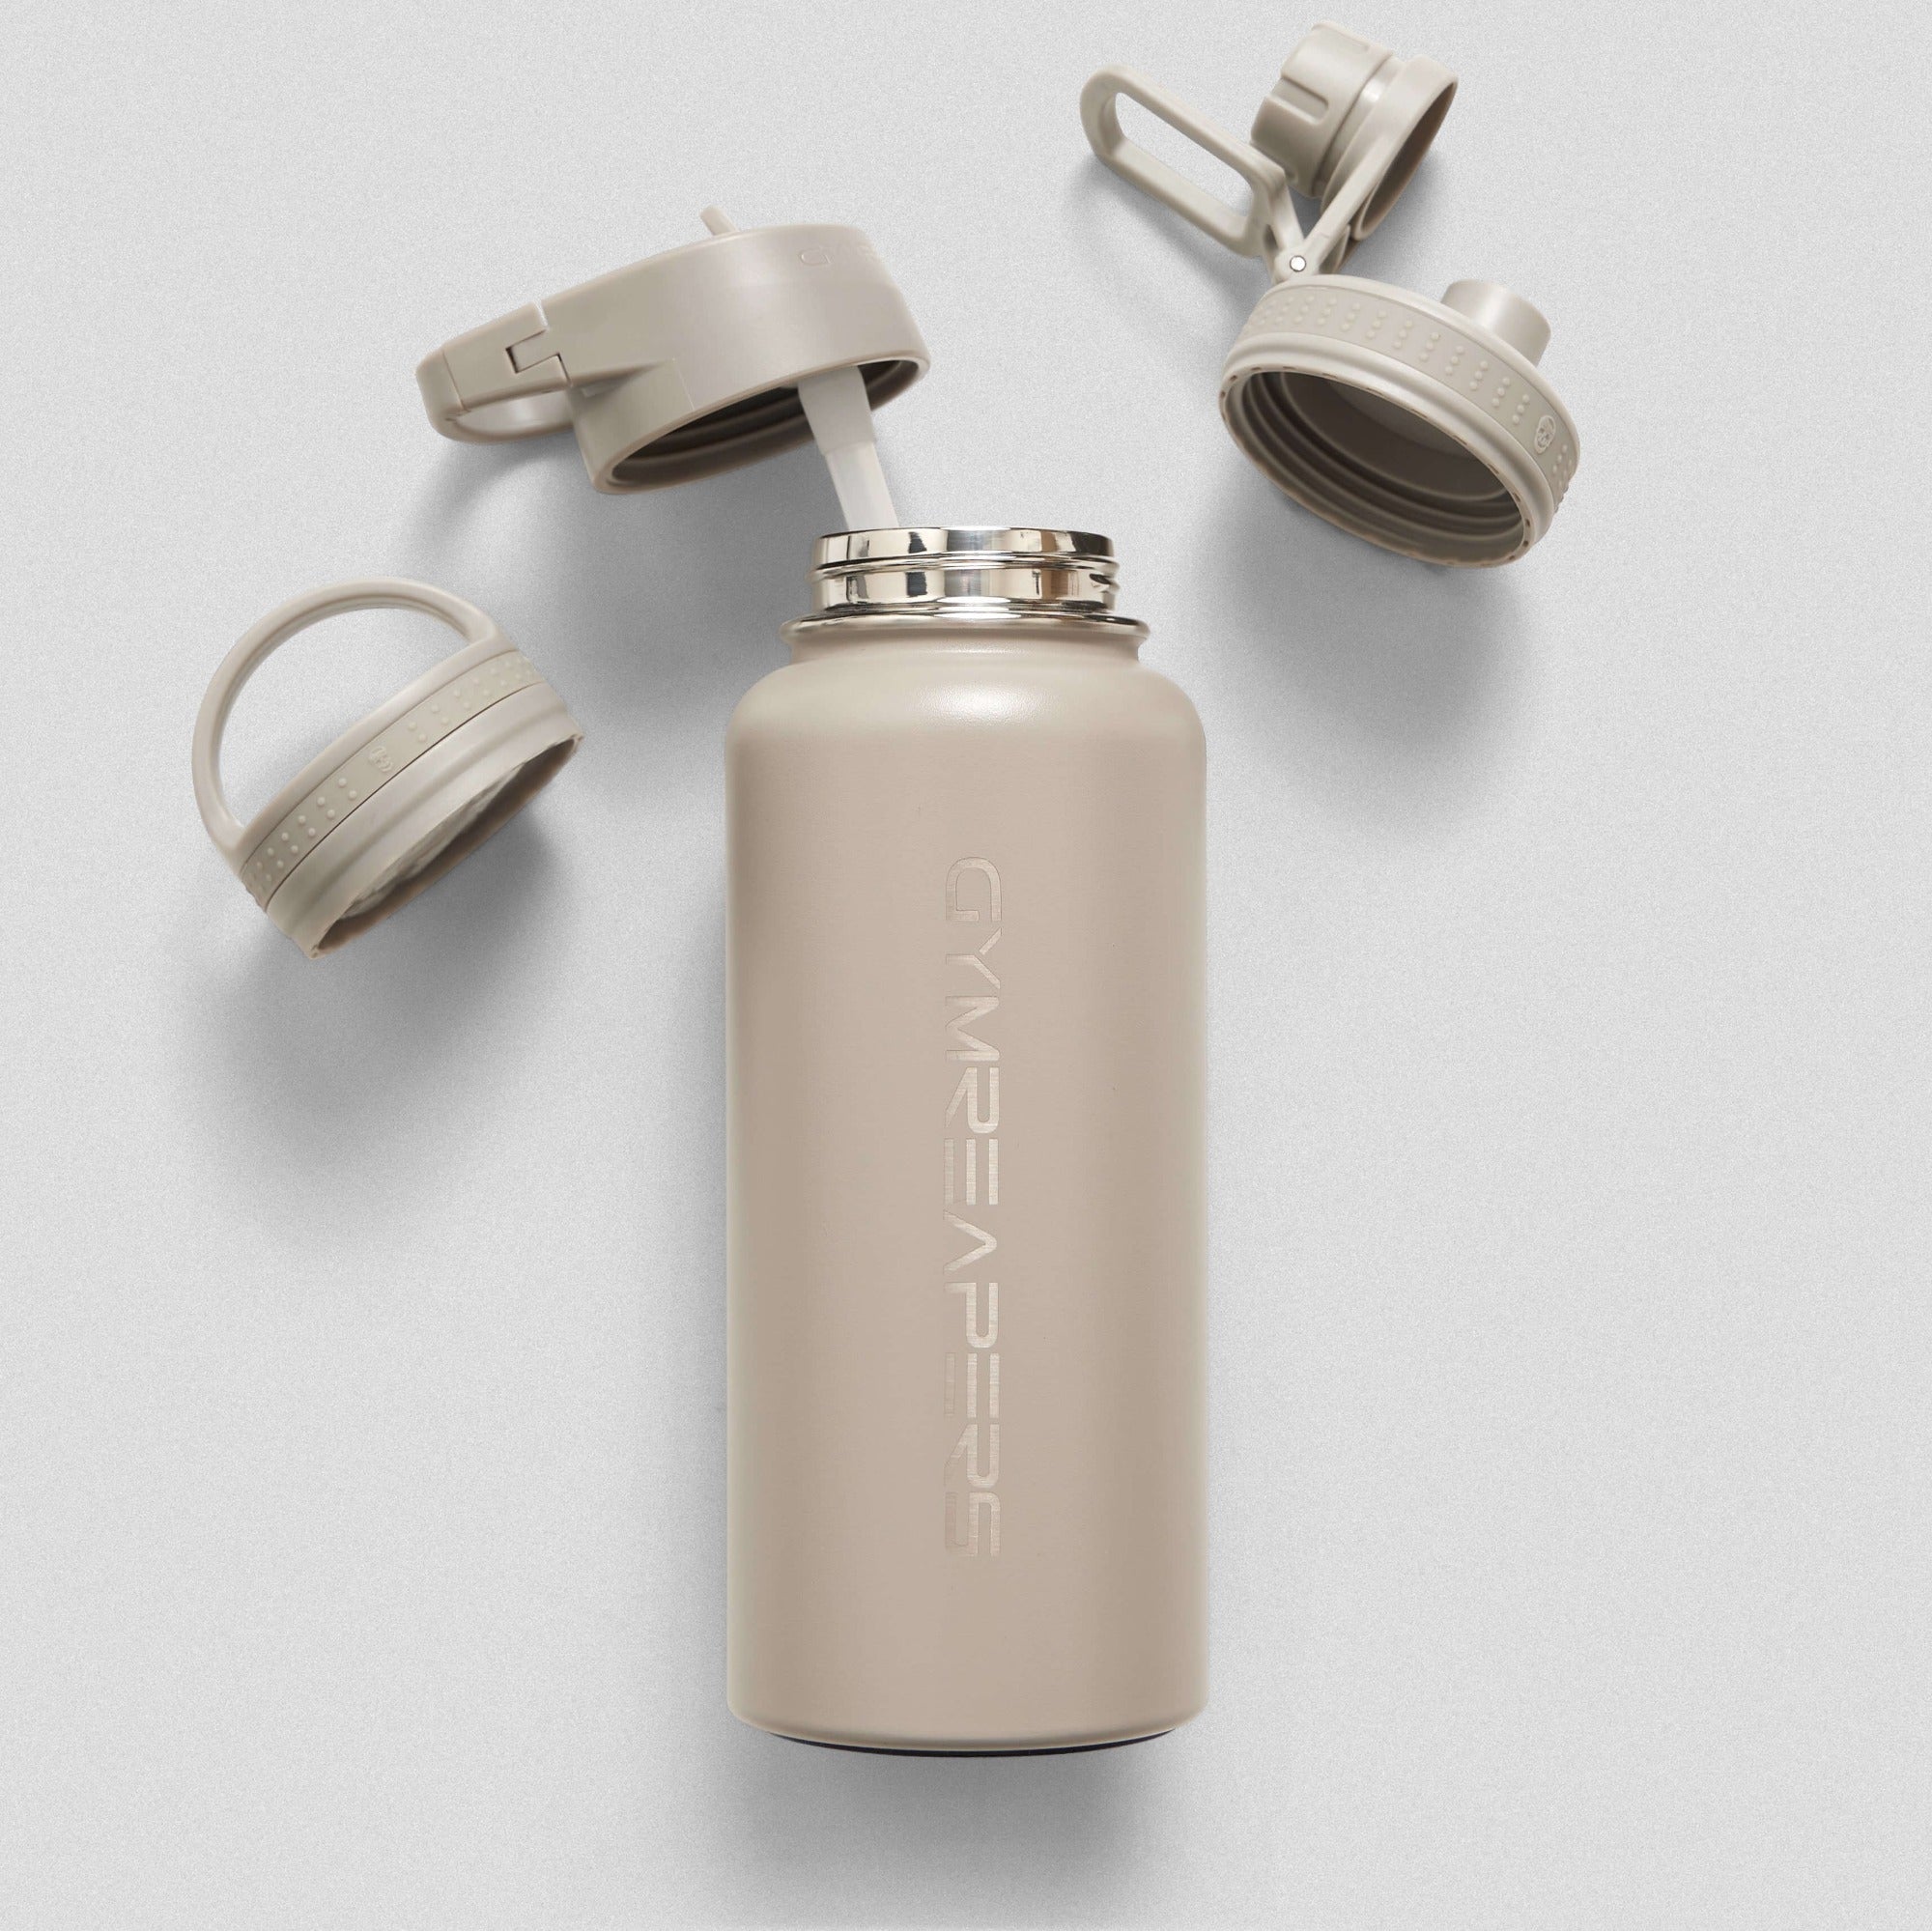 32 oz stainless steel bottle quicksand all caps